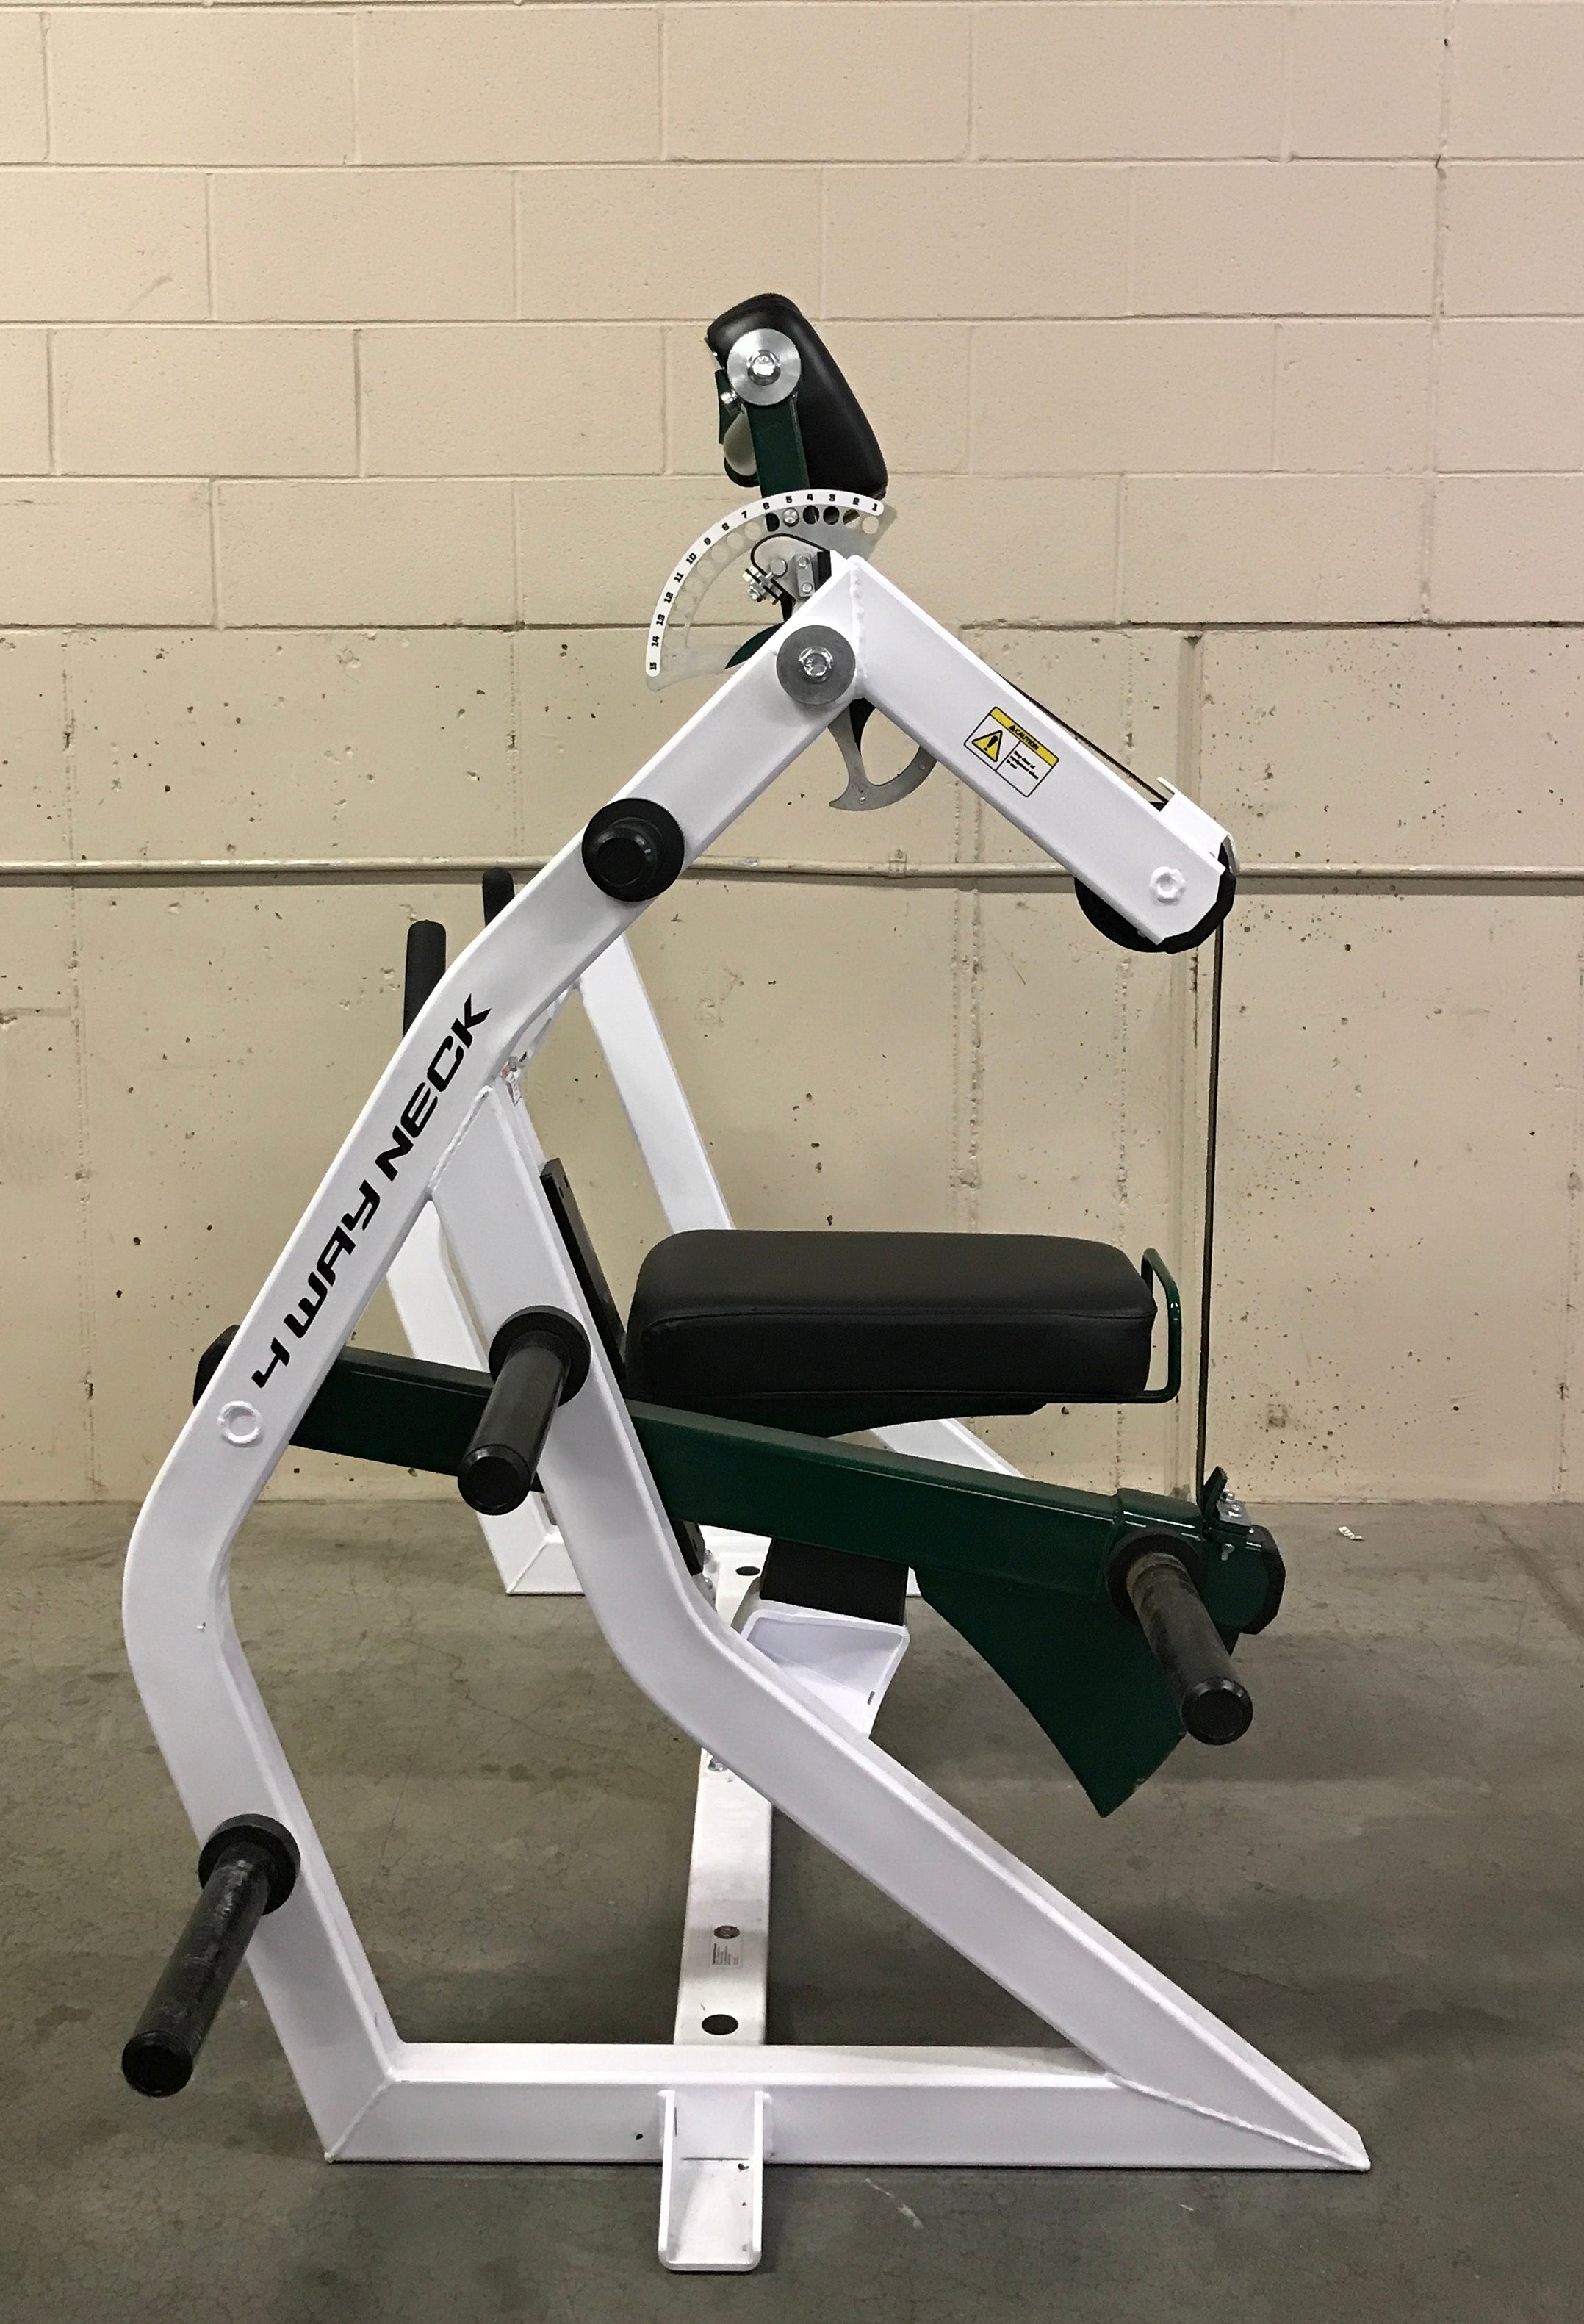 Rogers Athletic Co. 4 Way Neck Machine